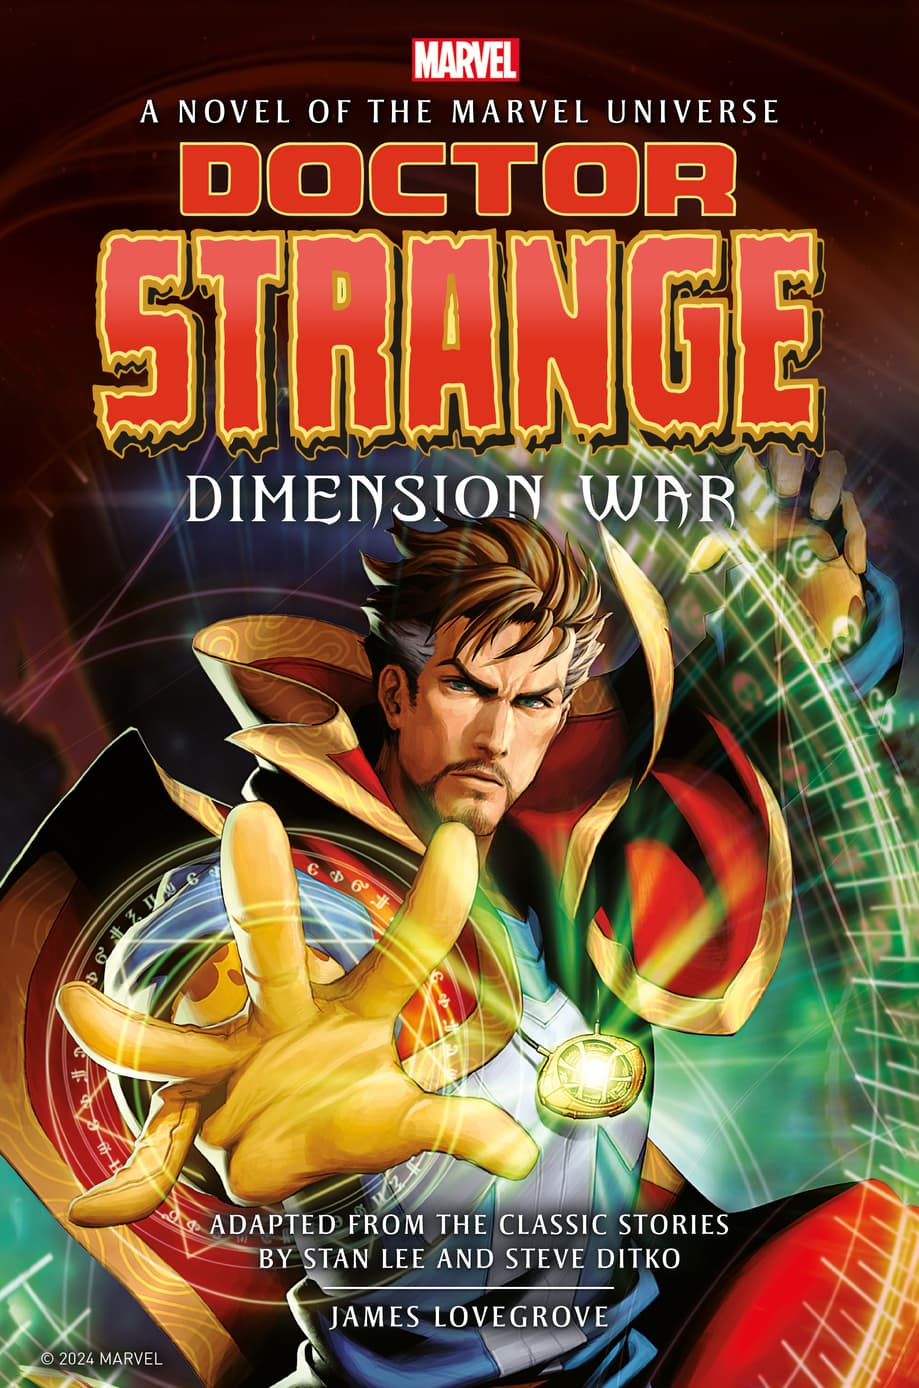 First Look: Cover to Doctor Strange: Dimension War.